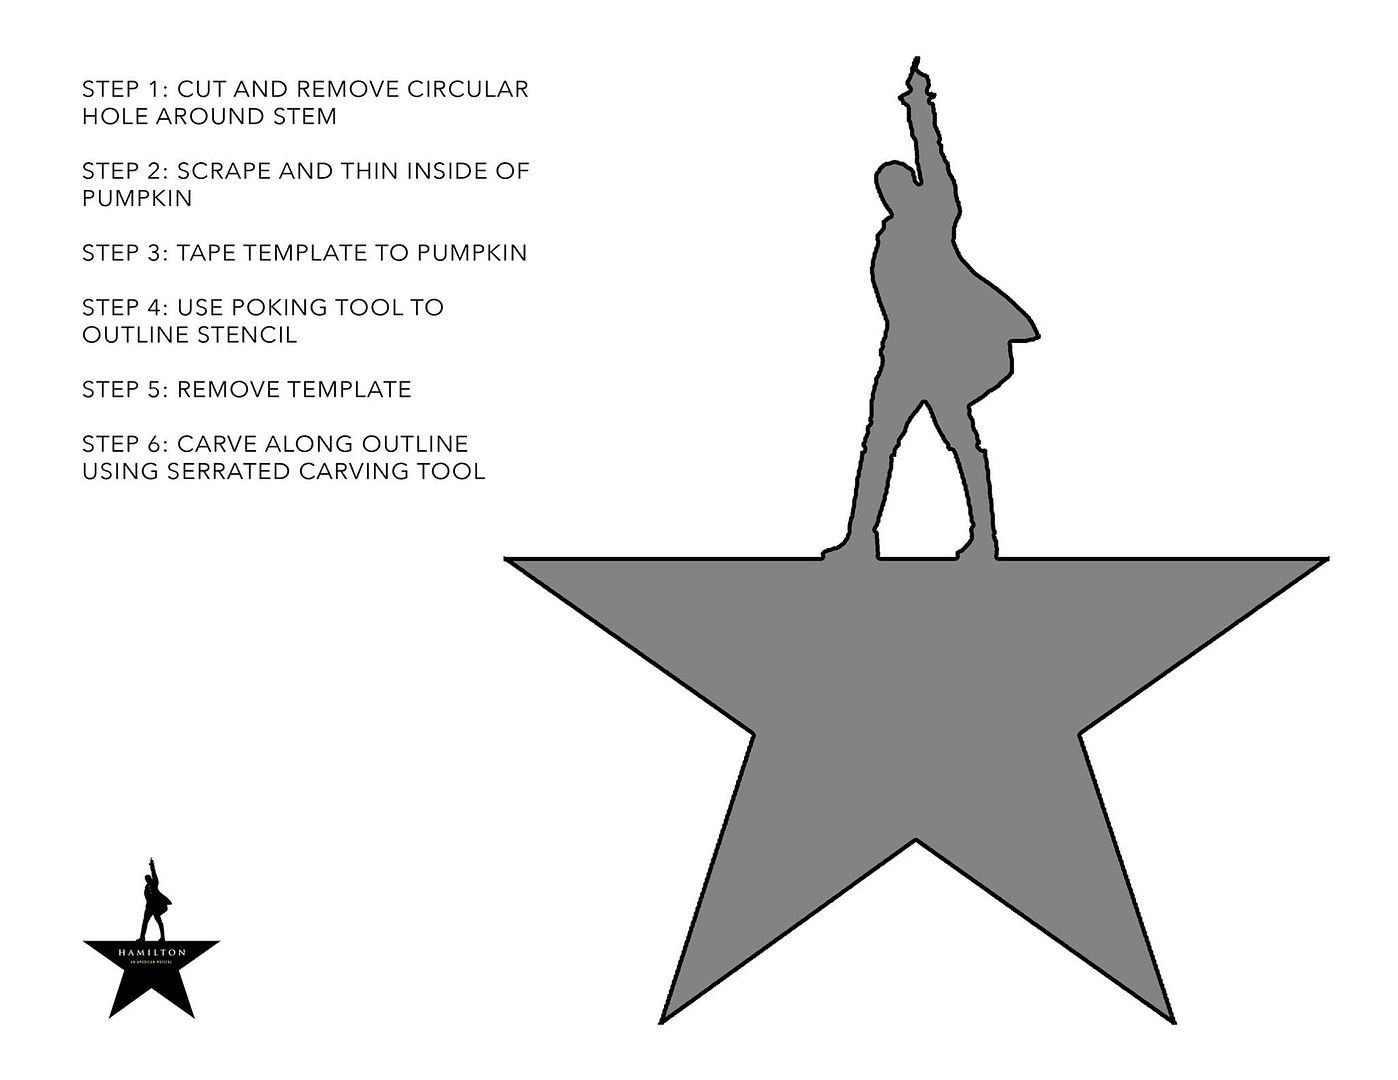 Make a #HamiLantern with this Hamilton template on your pumpkin.